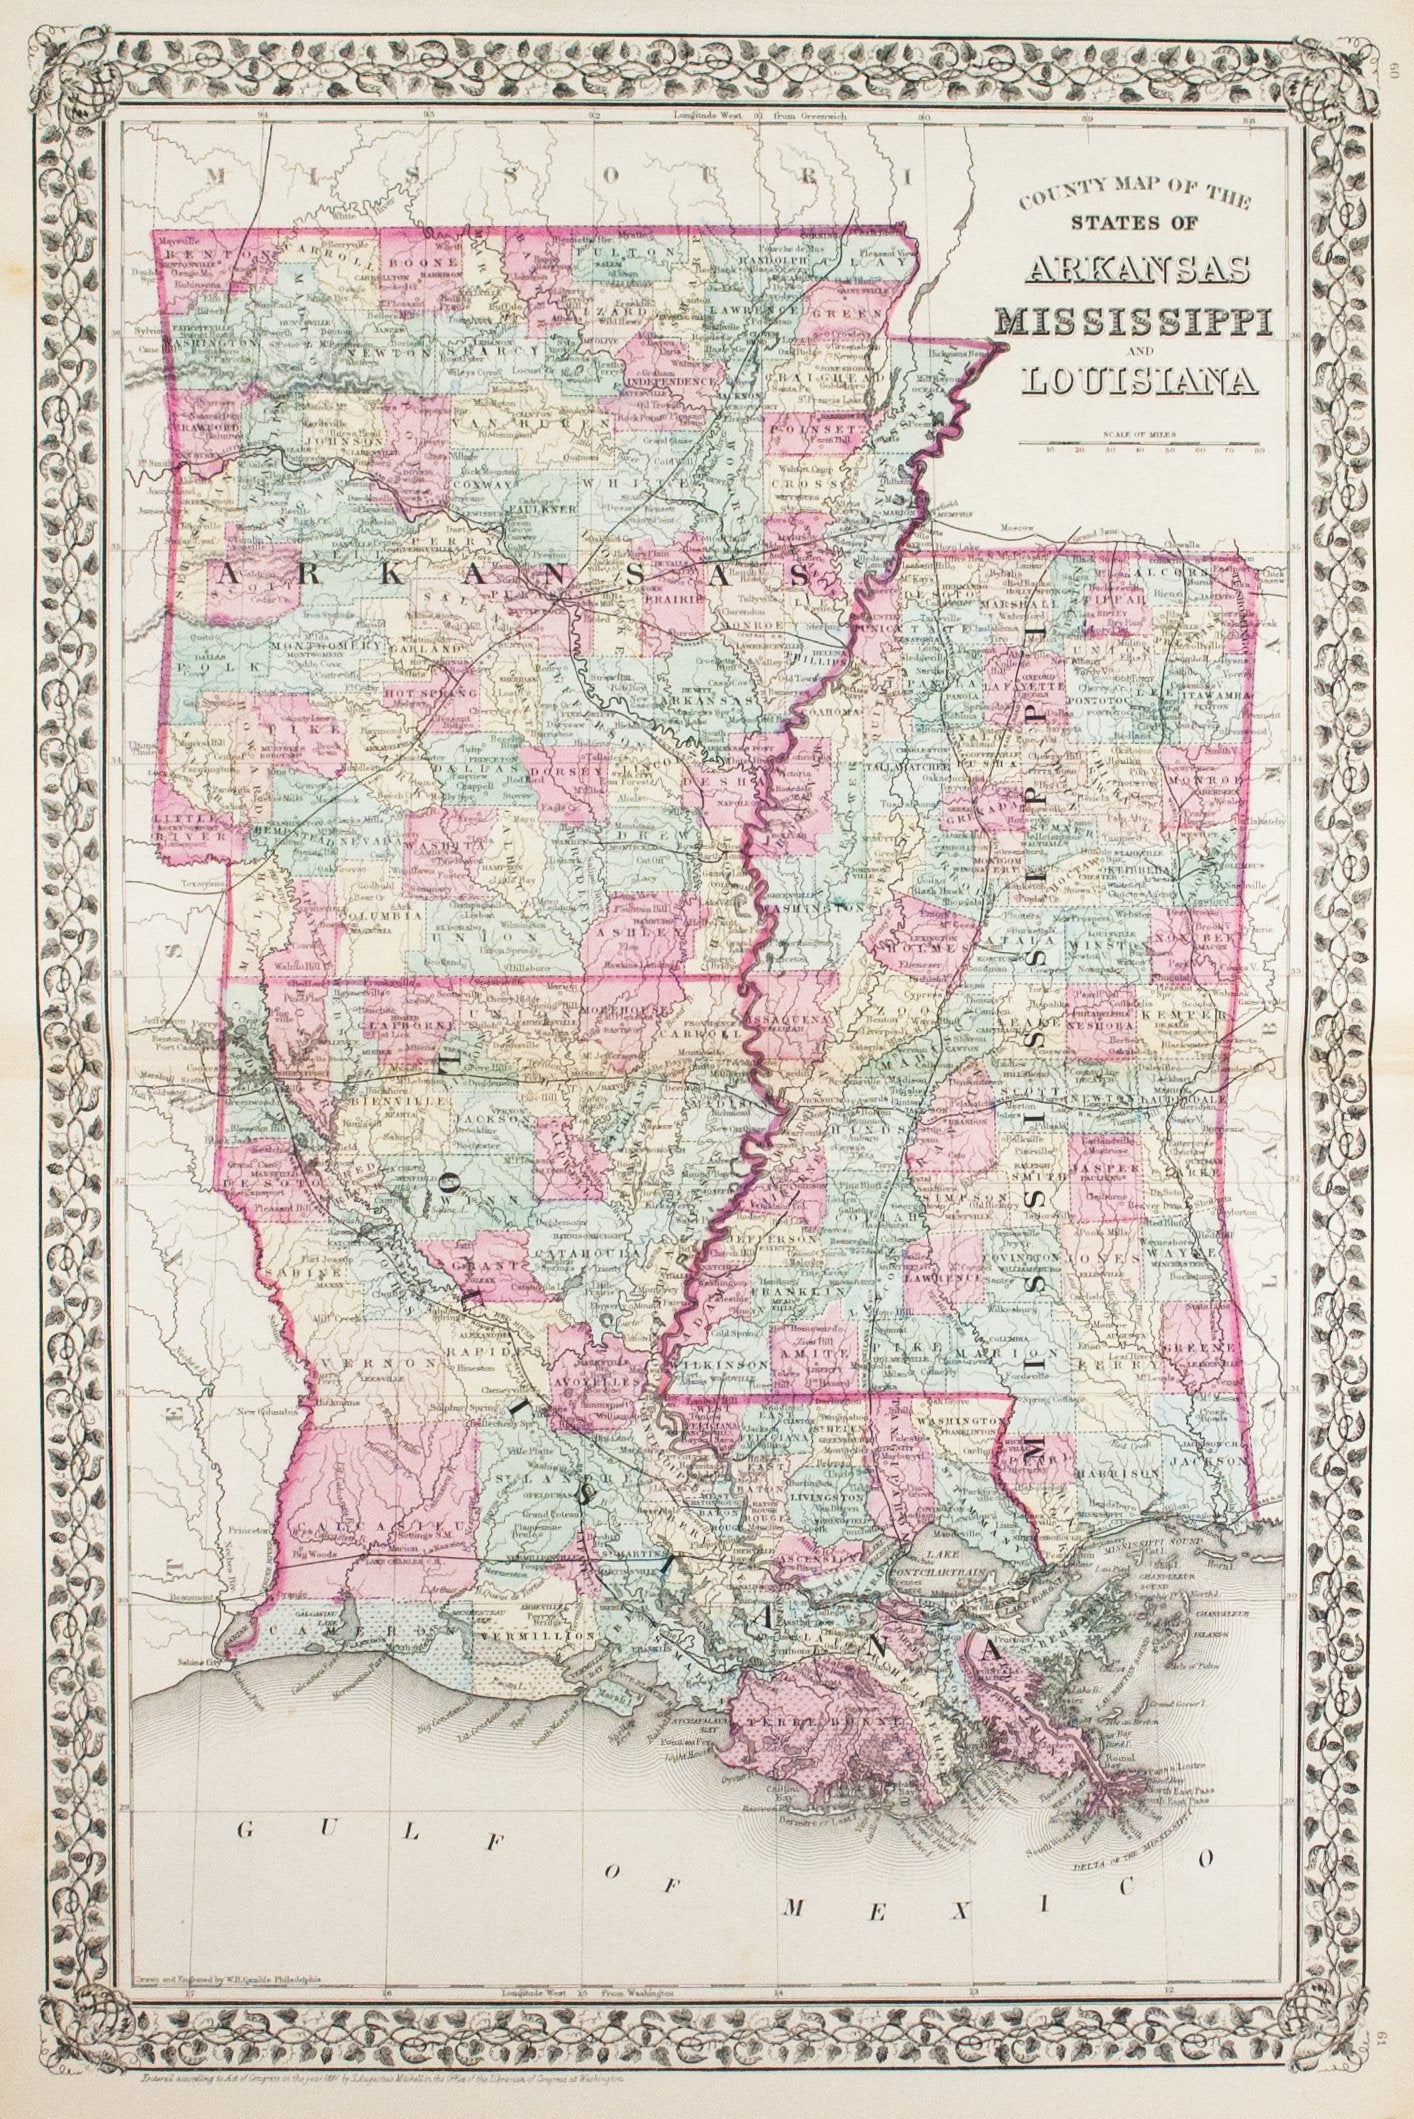 County Map of the States of Arkansas Mississippi and Louisiana